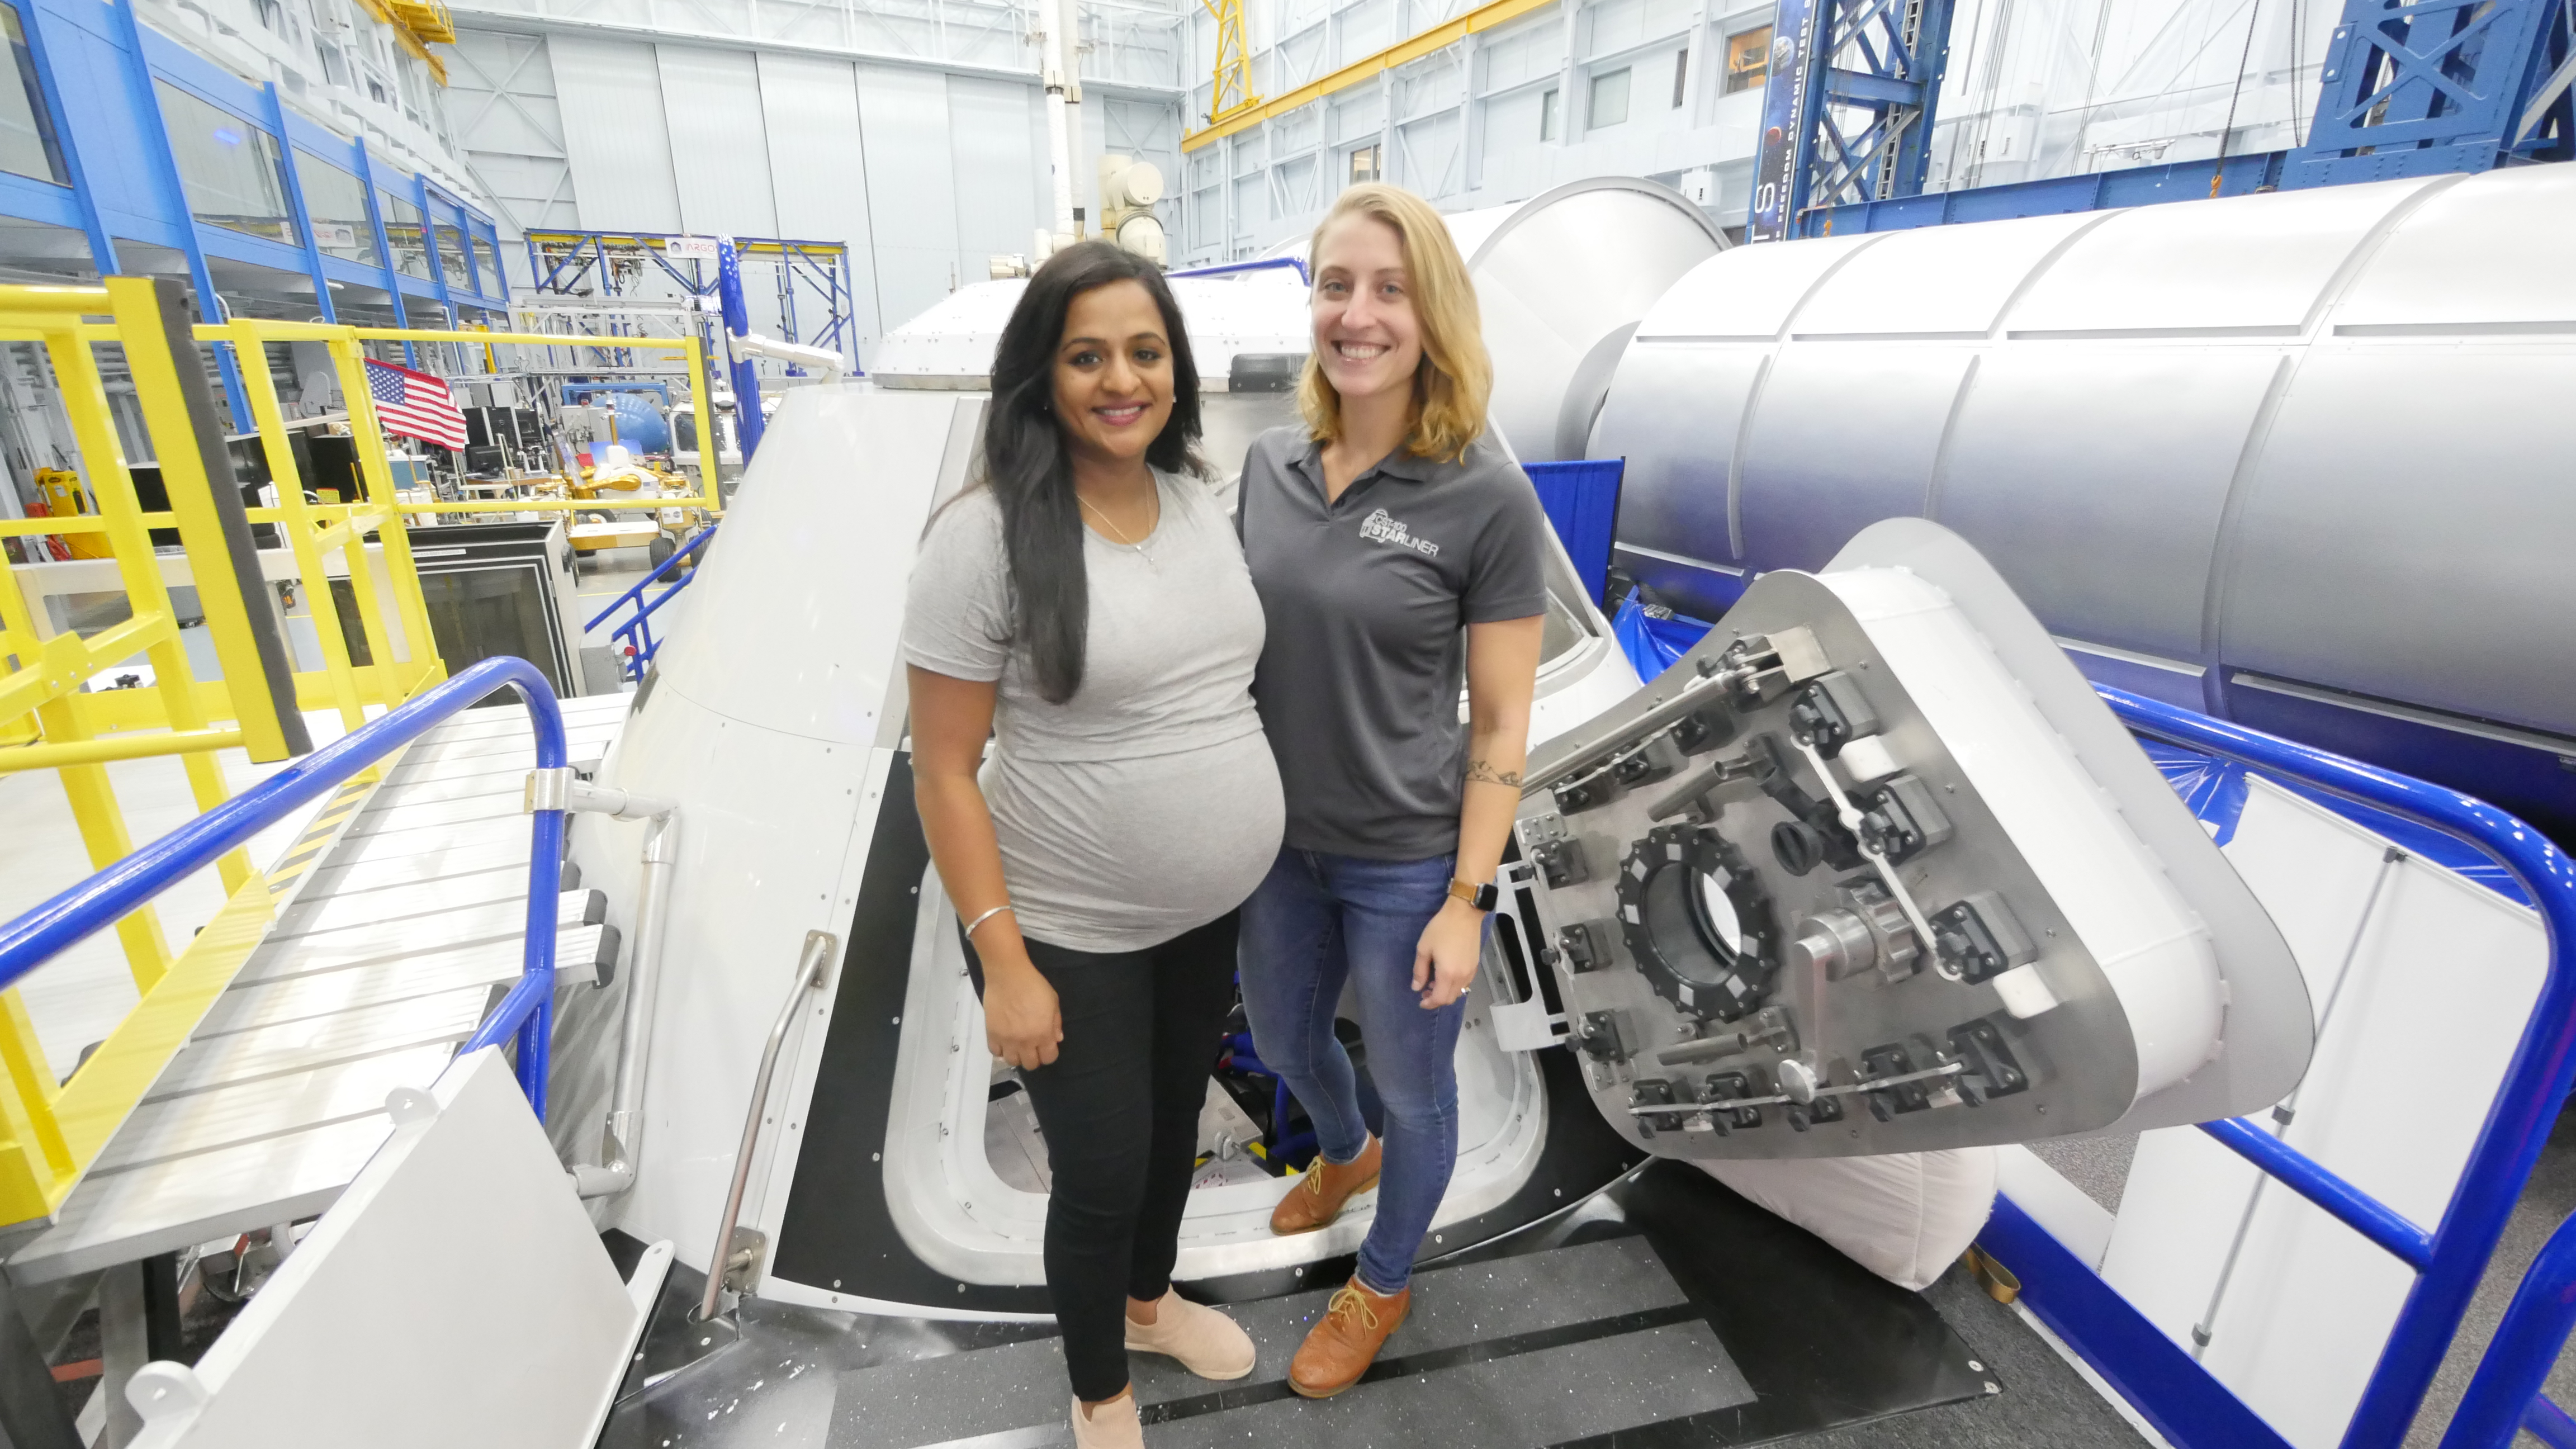 Kavya Manyapu SM ’10 and Celena Dopart SM ’14 with the Boeing Starliner